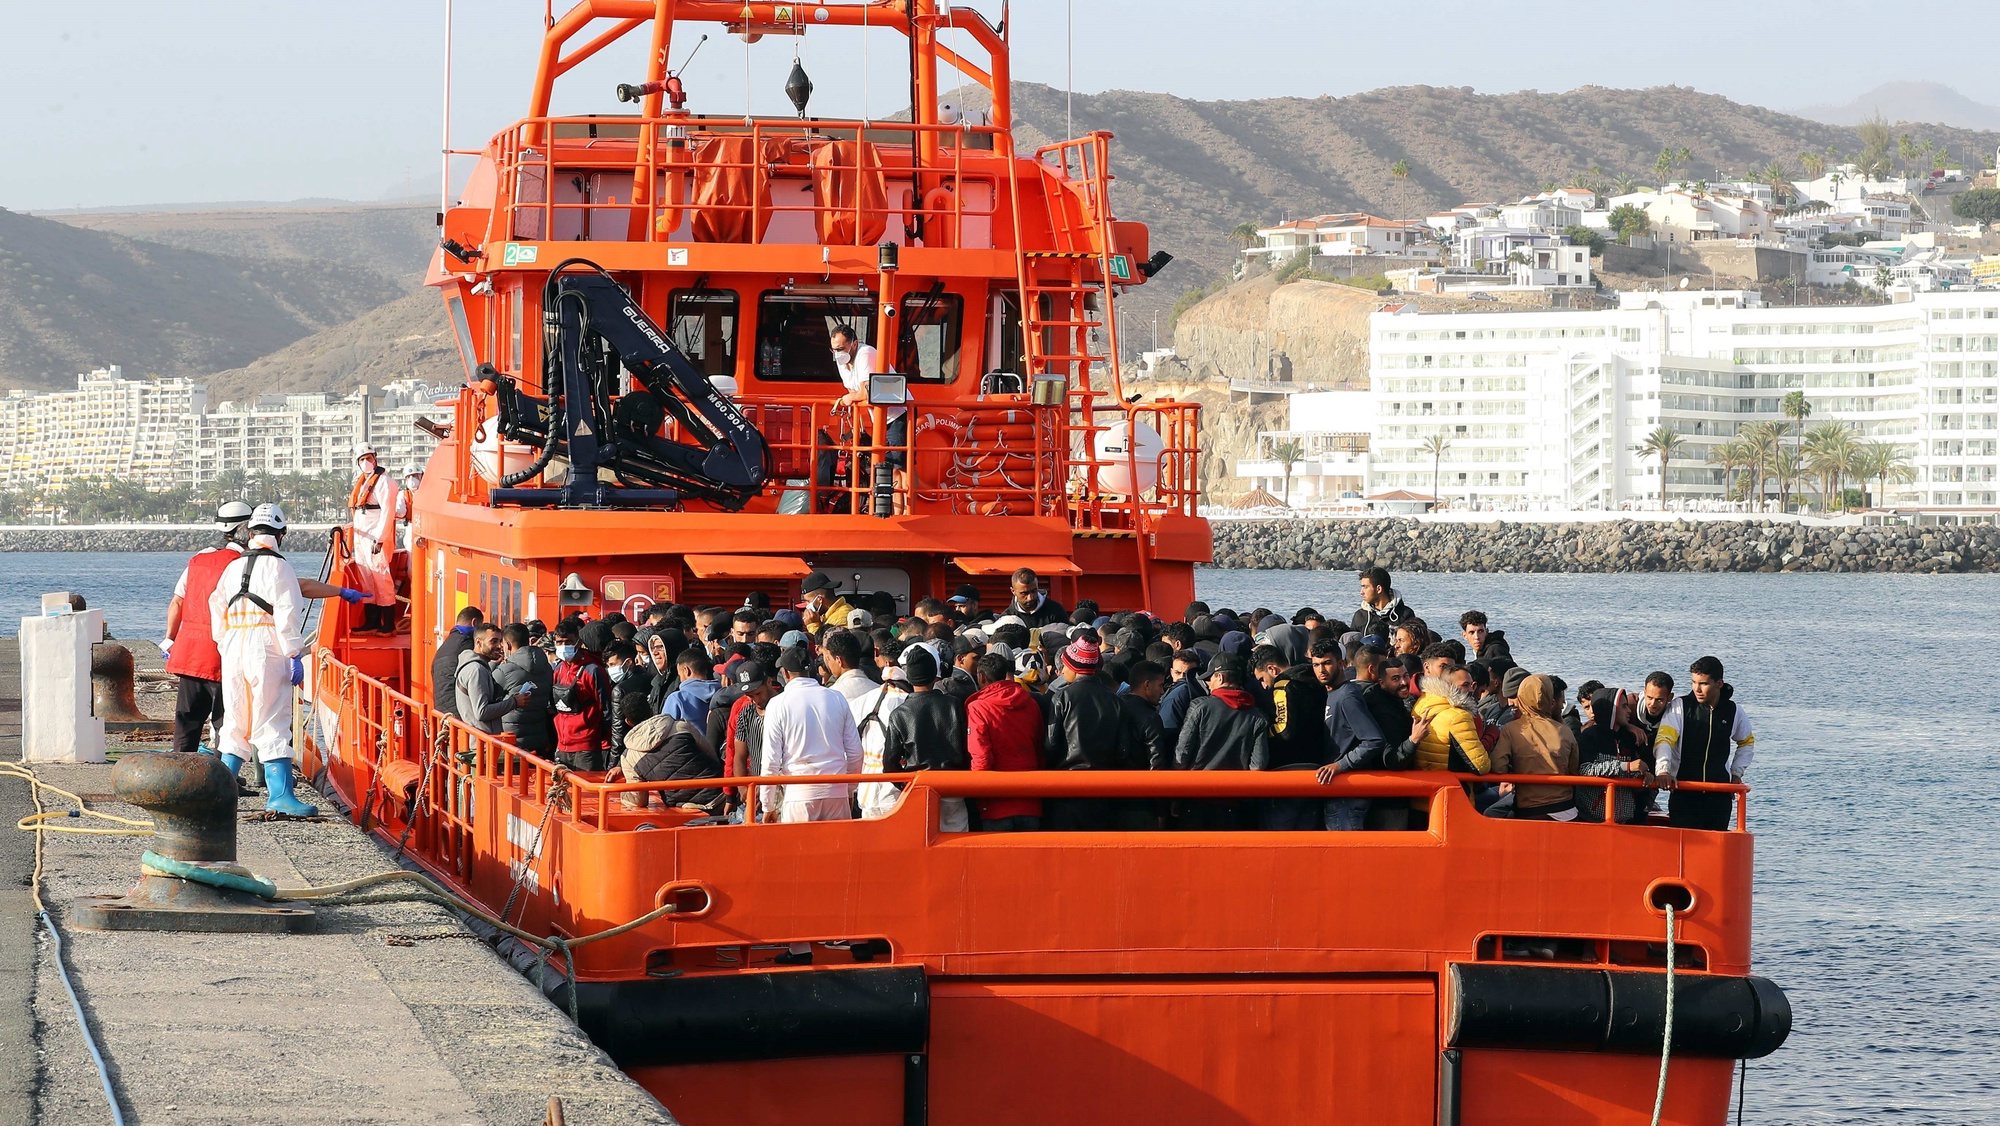 epa09747788 Migrants arrive at Arguineguin harbor, Gran Canaria, Canary Islands, Spain, 11 February 2022. Spanish sea rescue boats Polimnia and Concepcion Arenal have rescued some 290 migrants traveling in six small boats near Gran Canaria island.  EPA/ELVIRA URQUIJO A.